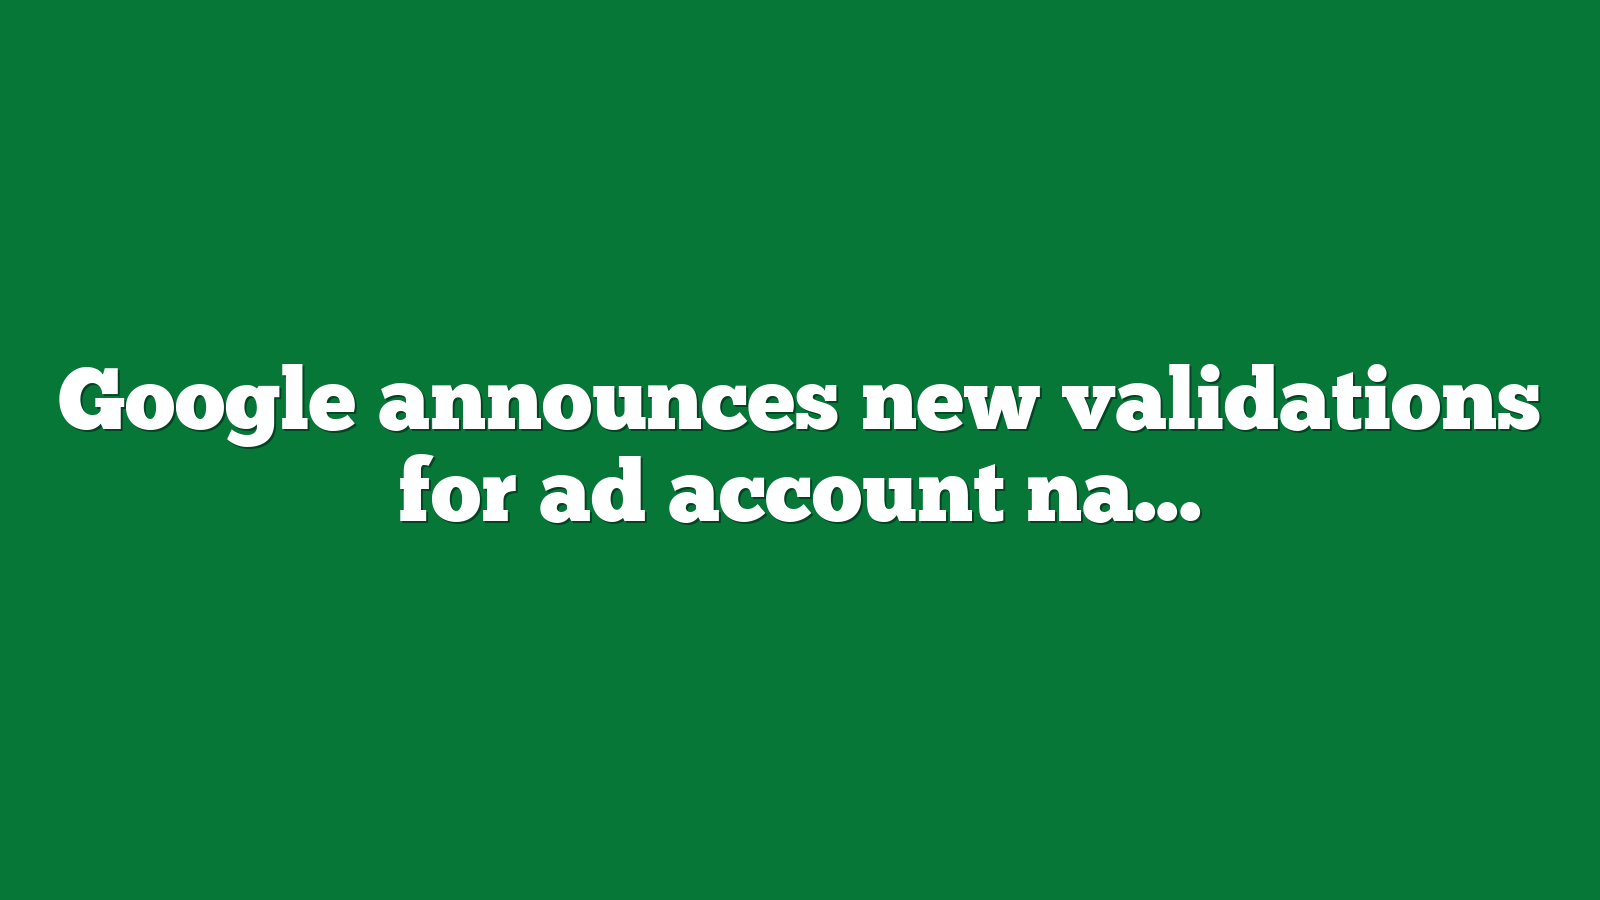 Google announces new validations for ad account names